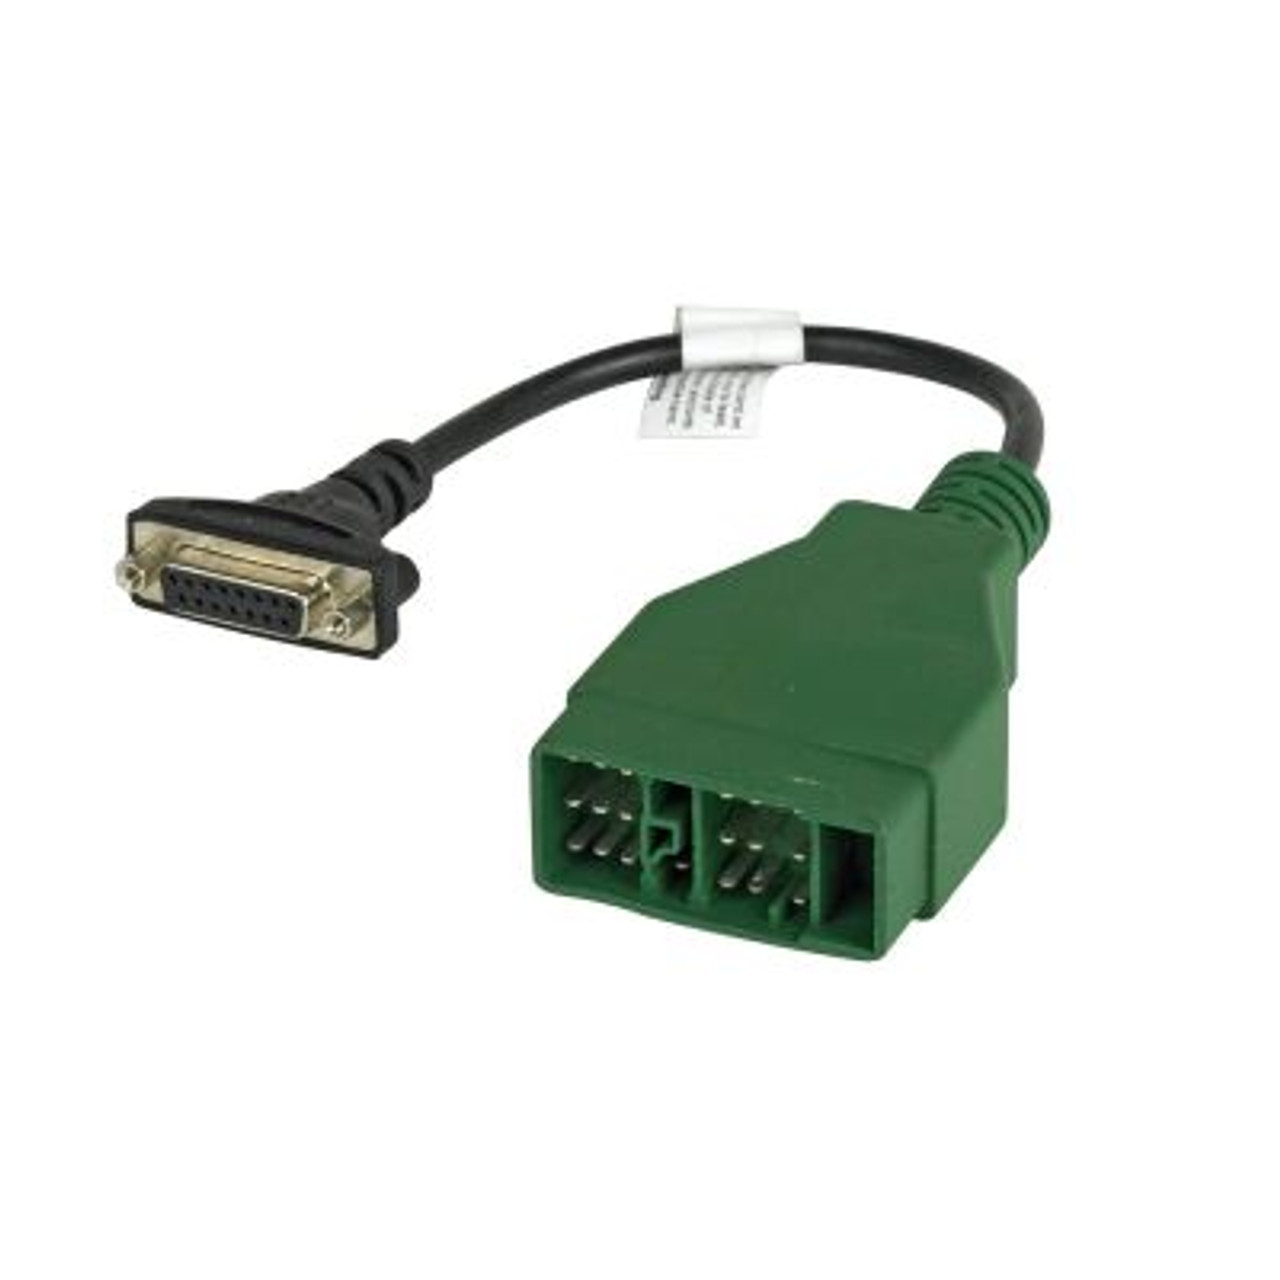 Replacement Toyota Rectangular OBD I Cable for use with CP9690